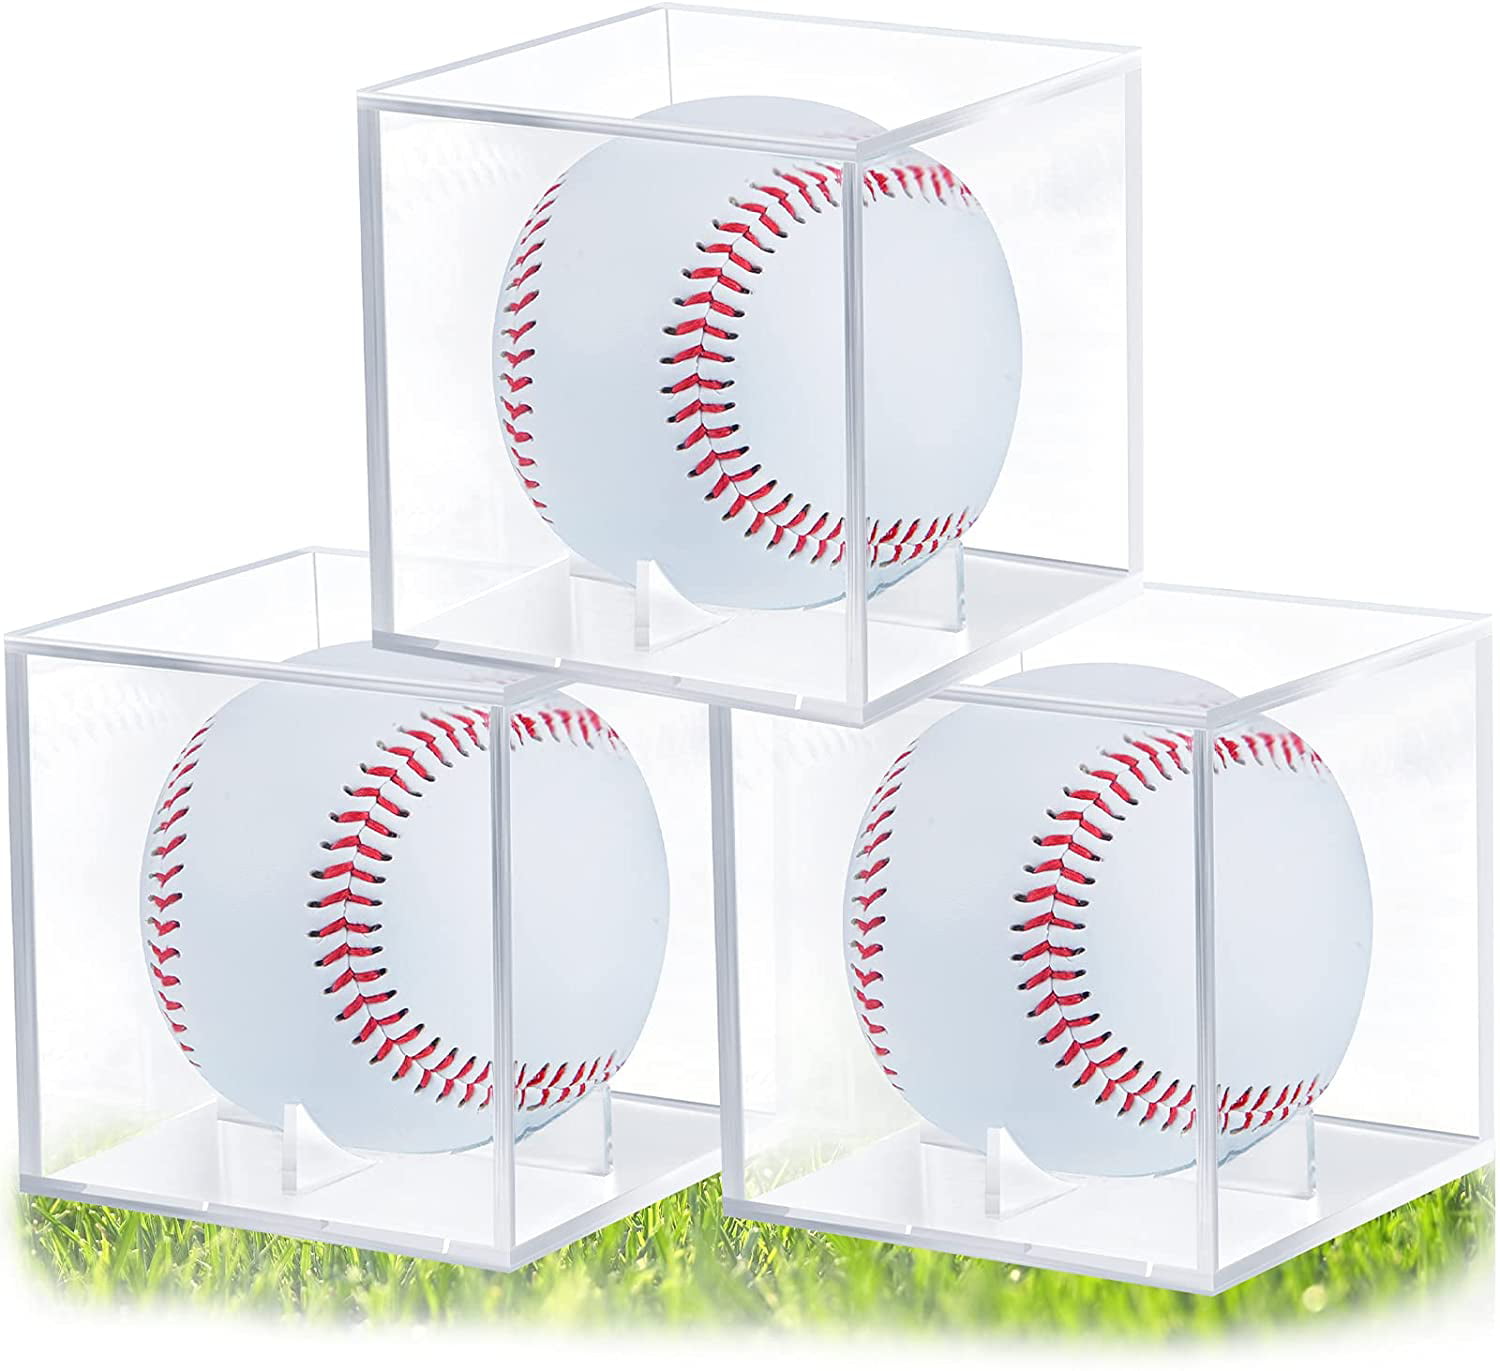 UV Protected Acrylic Cube Baseball Square Cube Holder Square Clear Box Baseball Sports Ball Case Memorabilia Showcase Autograph Ball Protector for Official Size Ball 4 Pieces Baseball Display Case